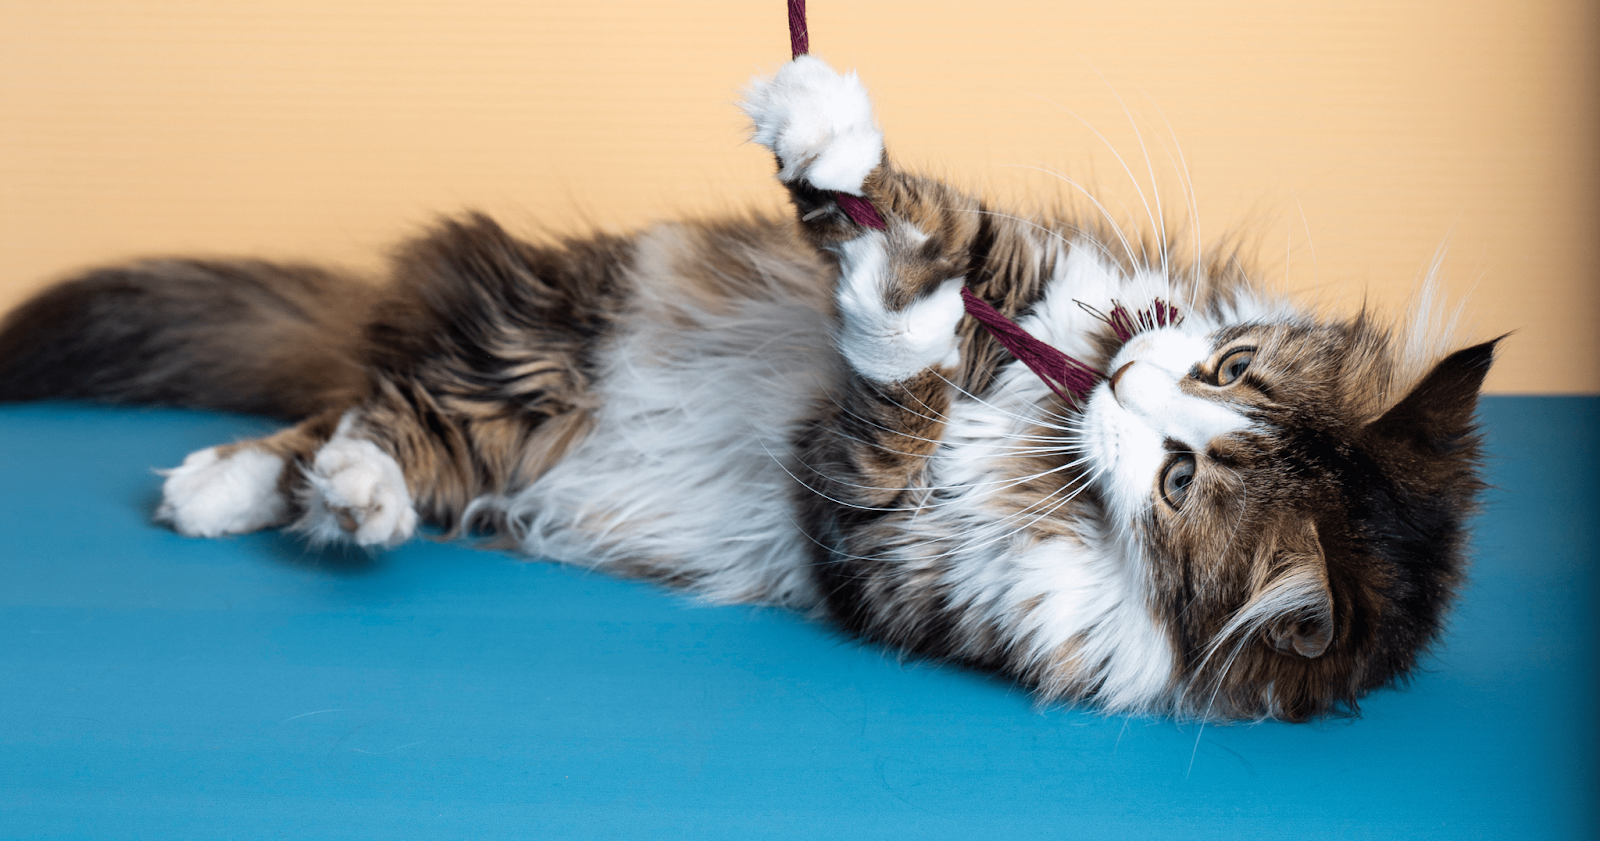 Norwegian forest cat playing with string